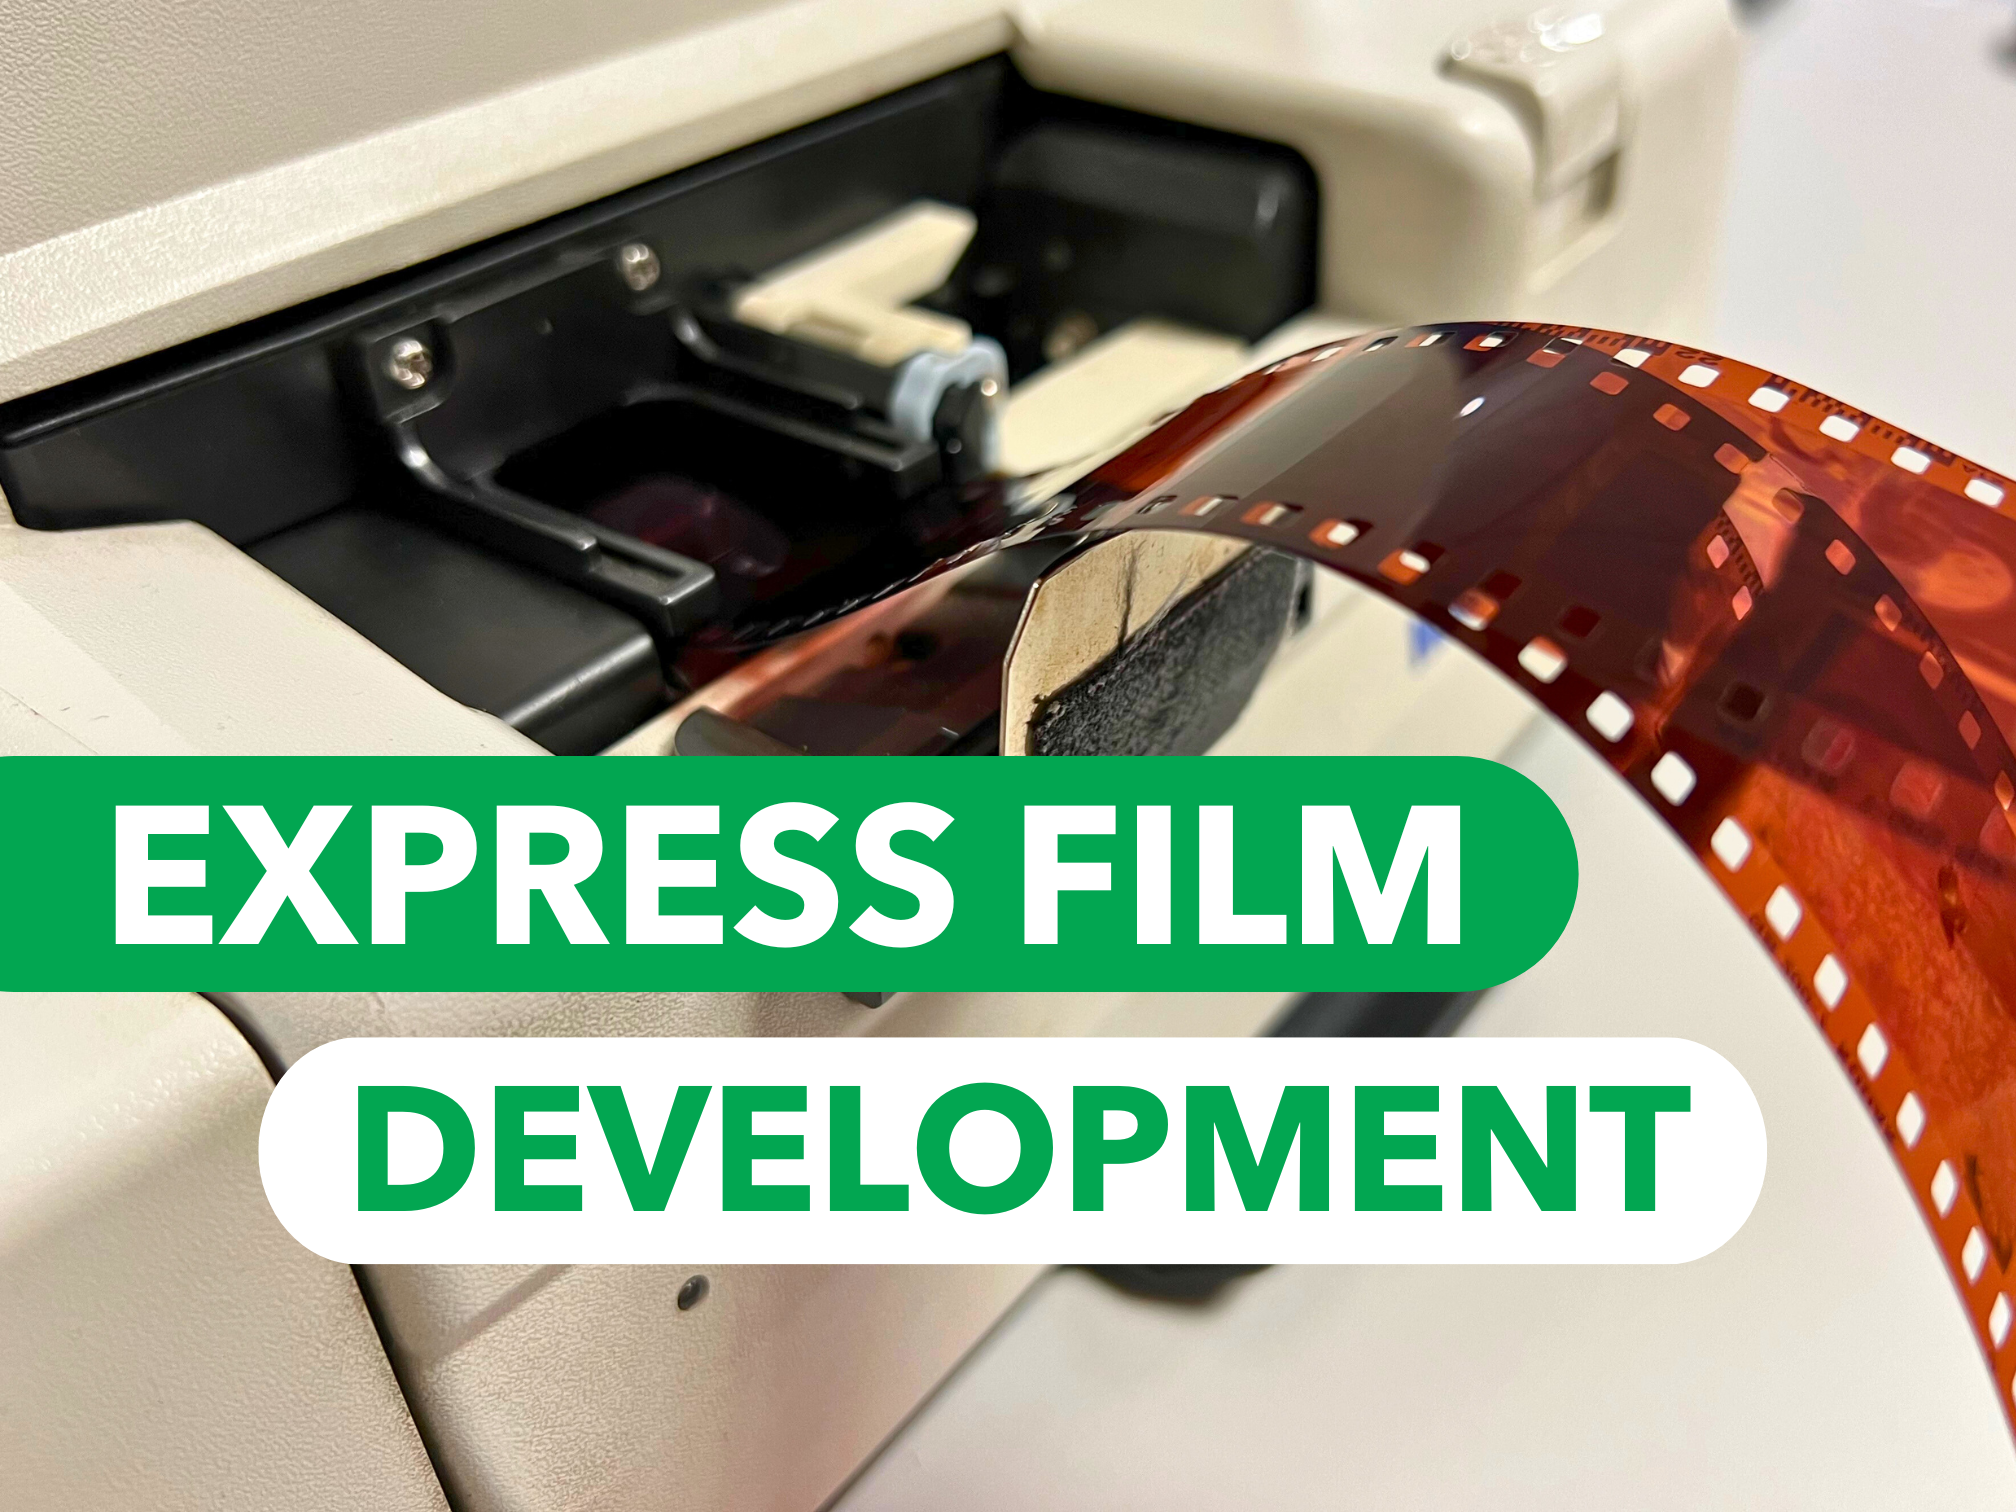 EXPRESS Colour Film Development - with FREE tracked shipping to the lab